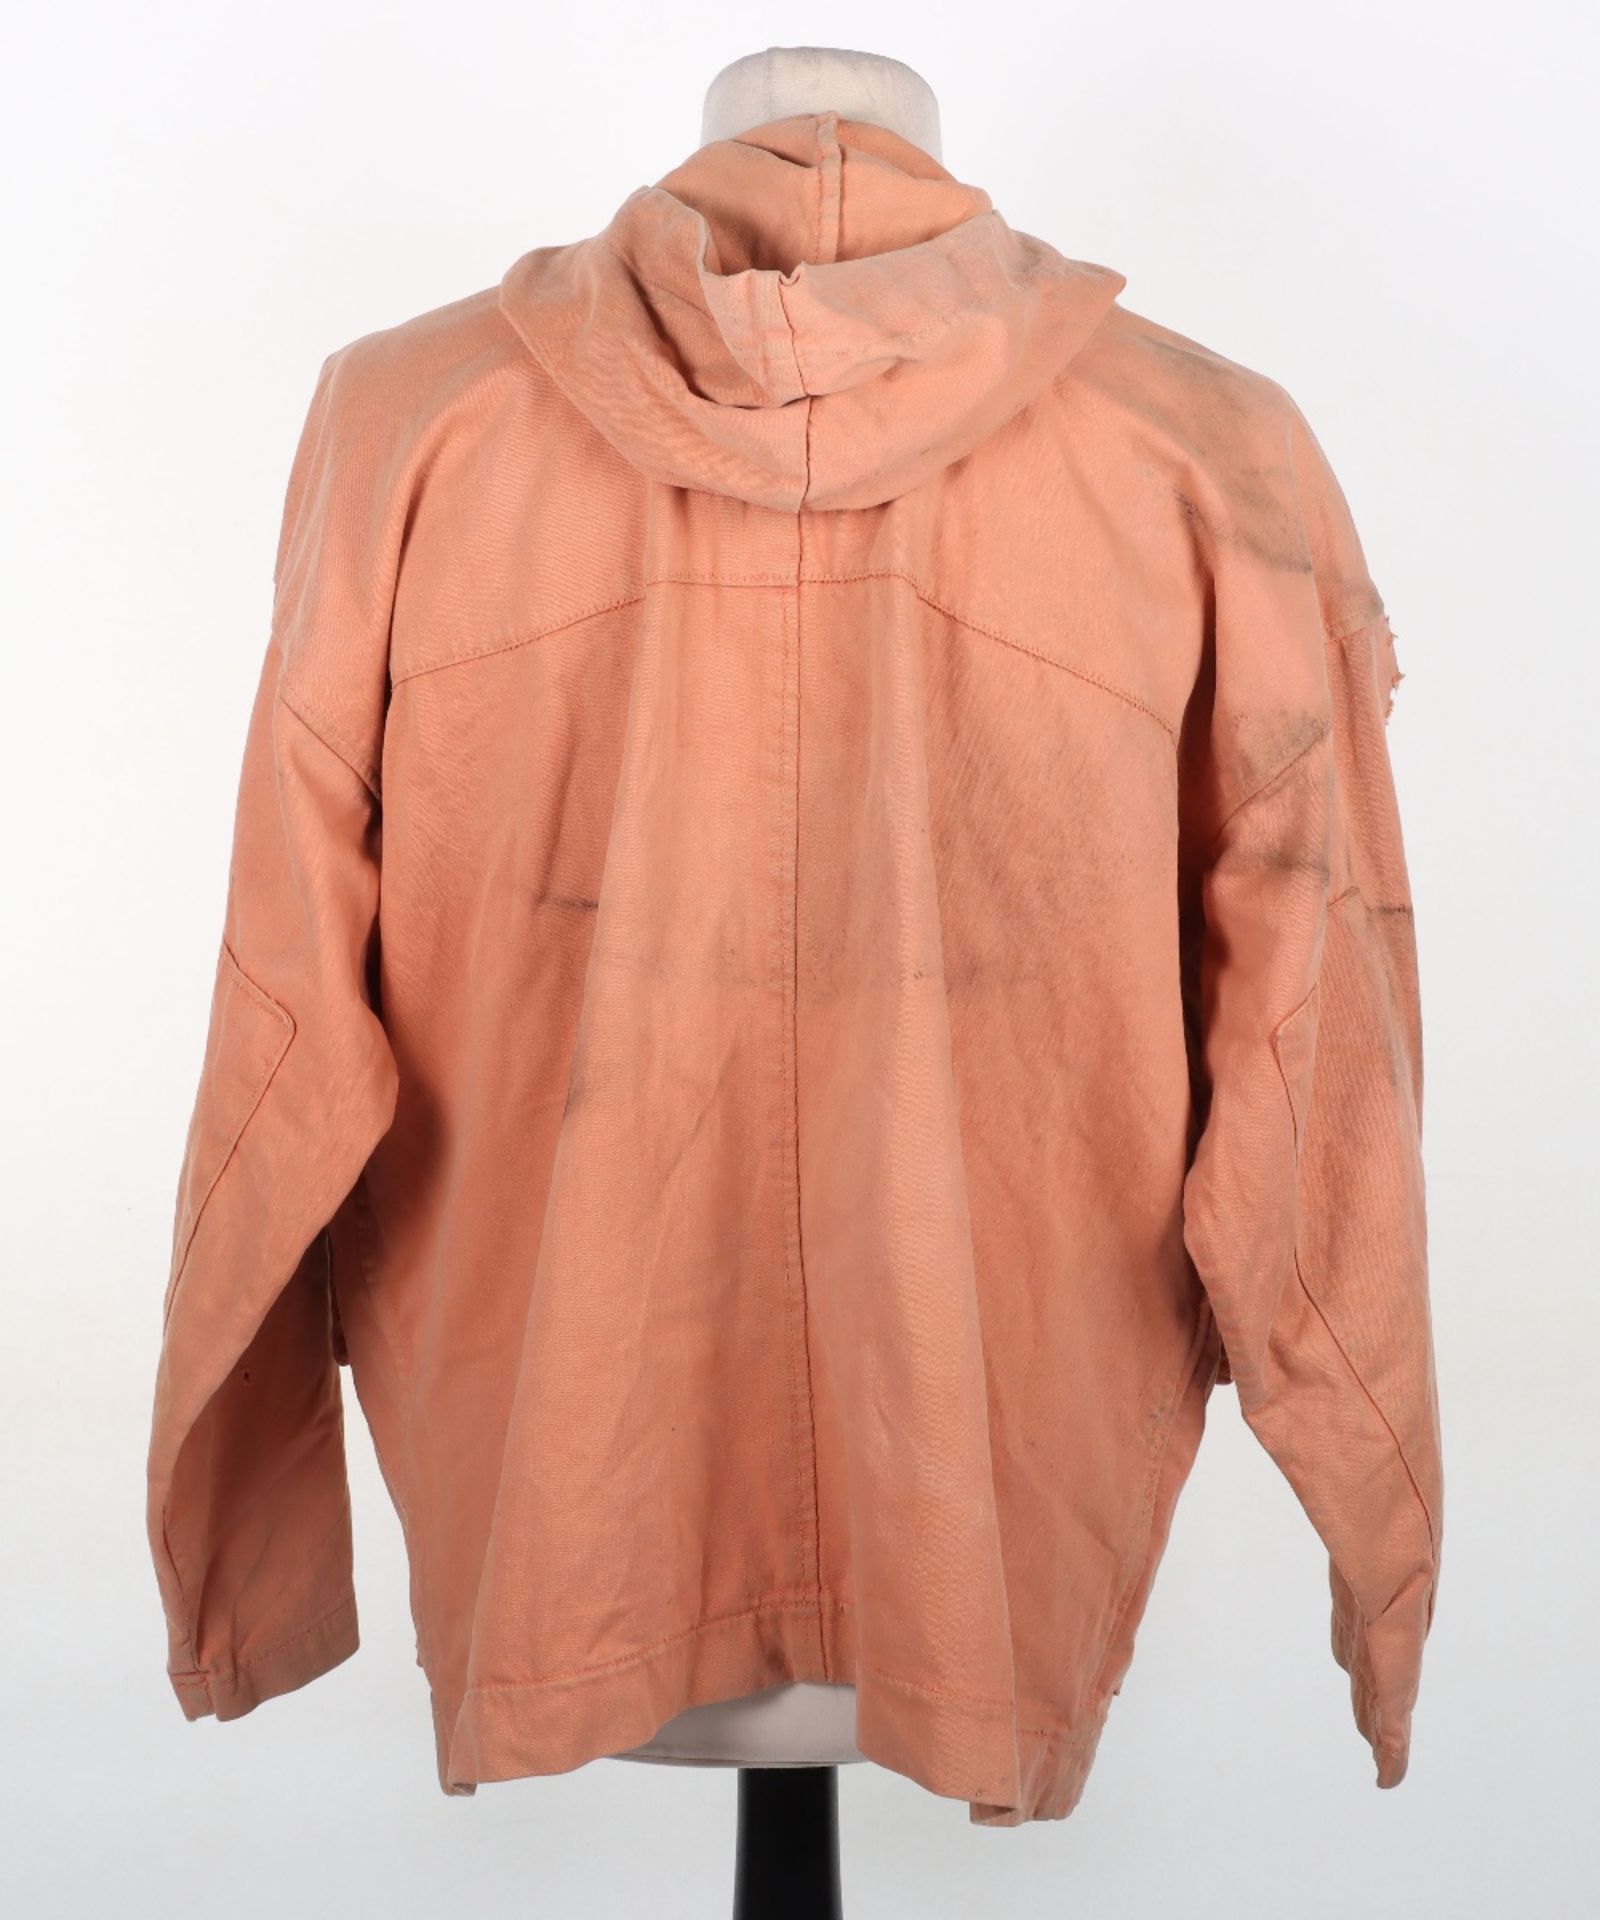 1942 British Snow Suit Dyed Pink for Wear in the North African Desert by the Long Range Desert Group - Image 6 of 6